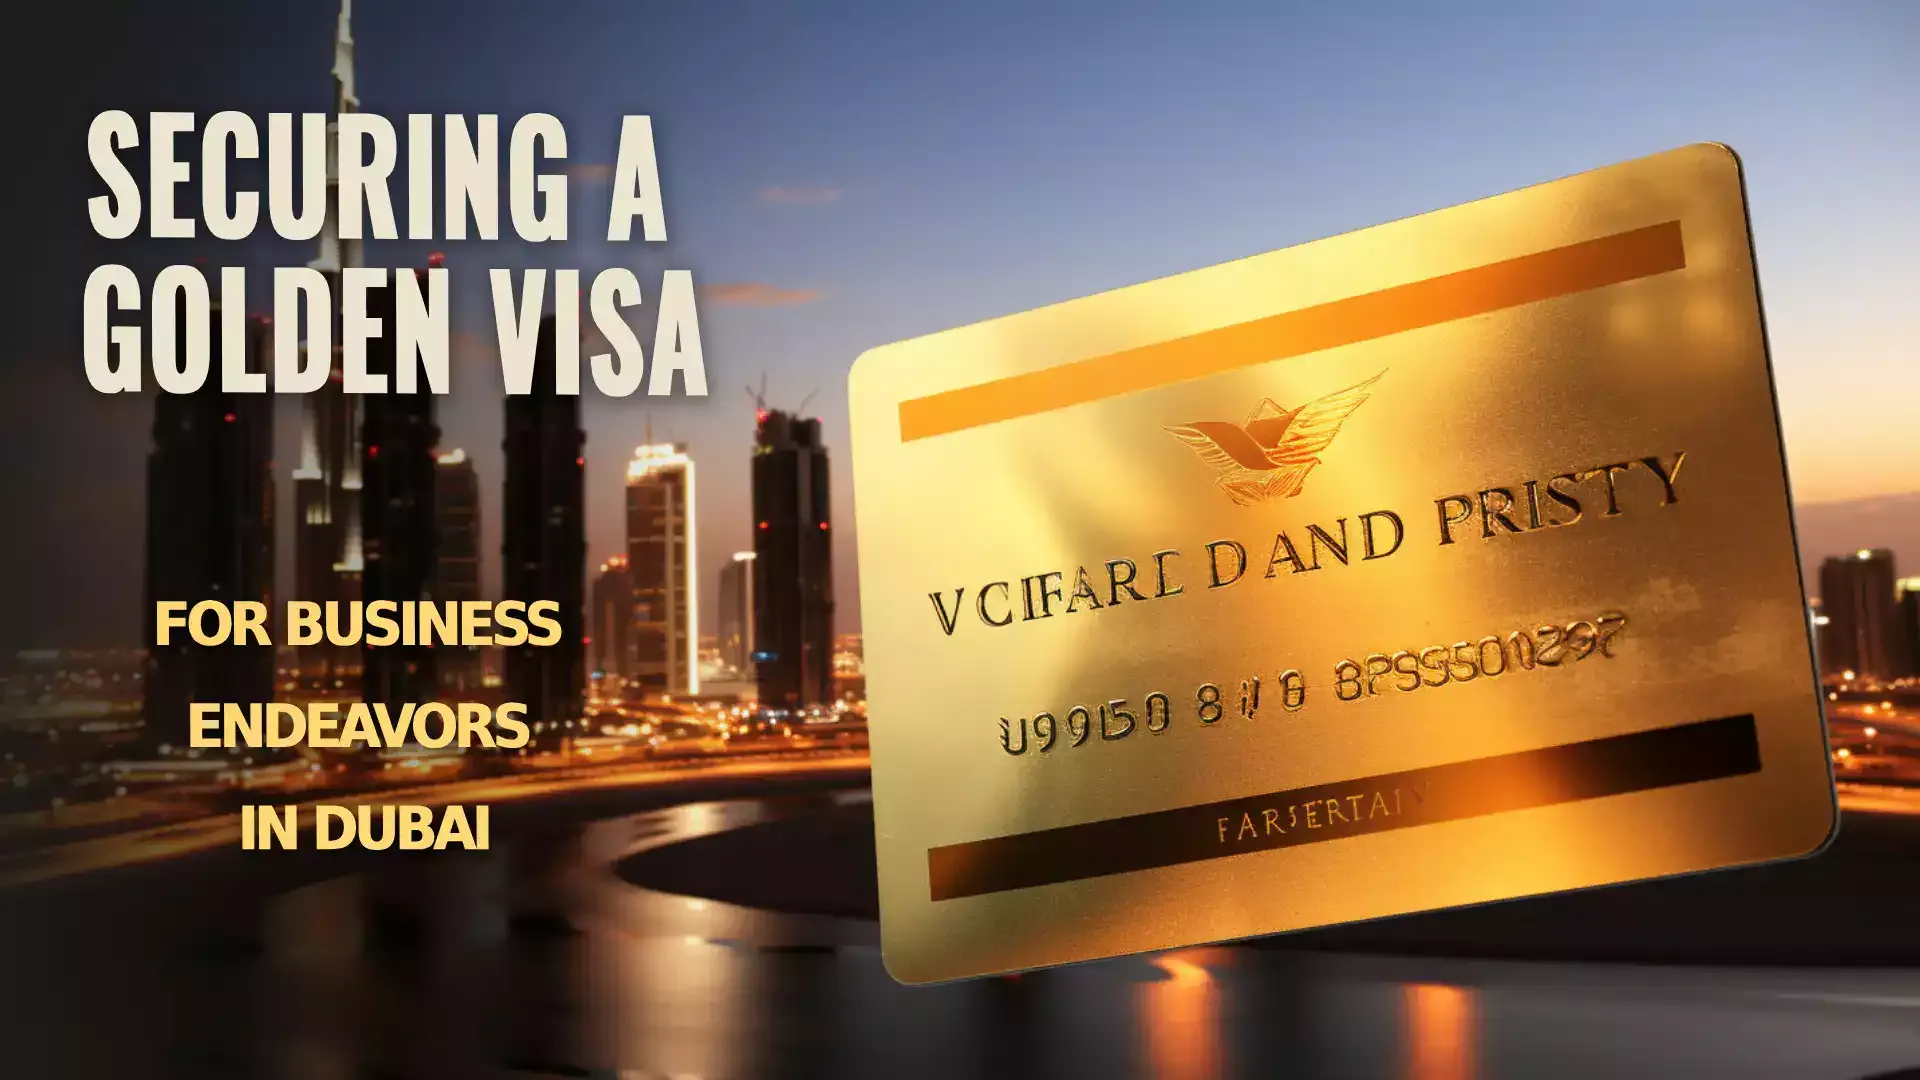 Image depicting the accessibility and advantages of obtaining a Golden Visa for business ventures in Dubai